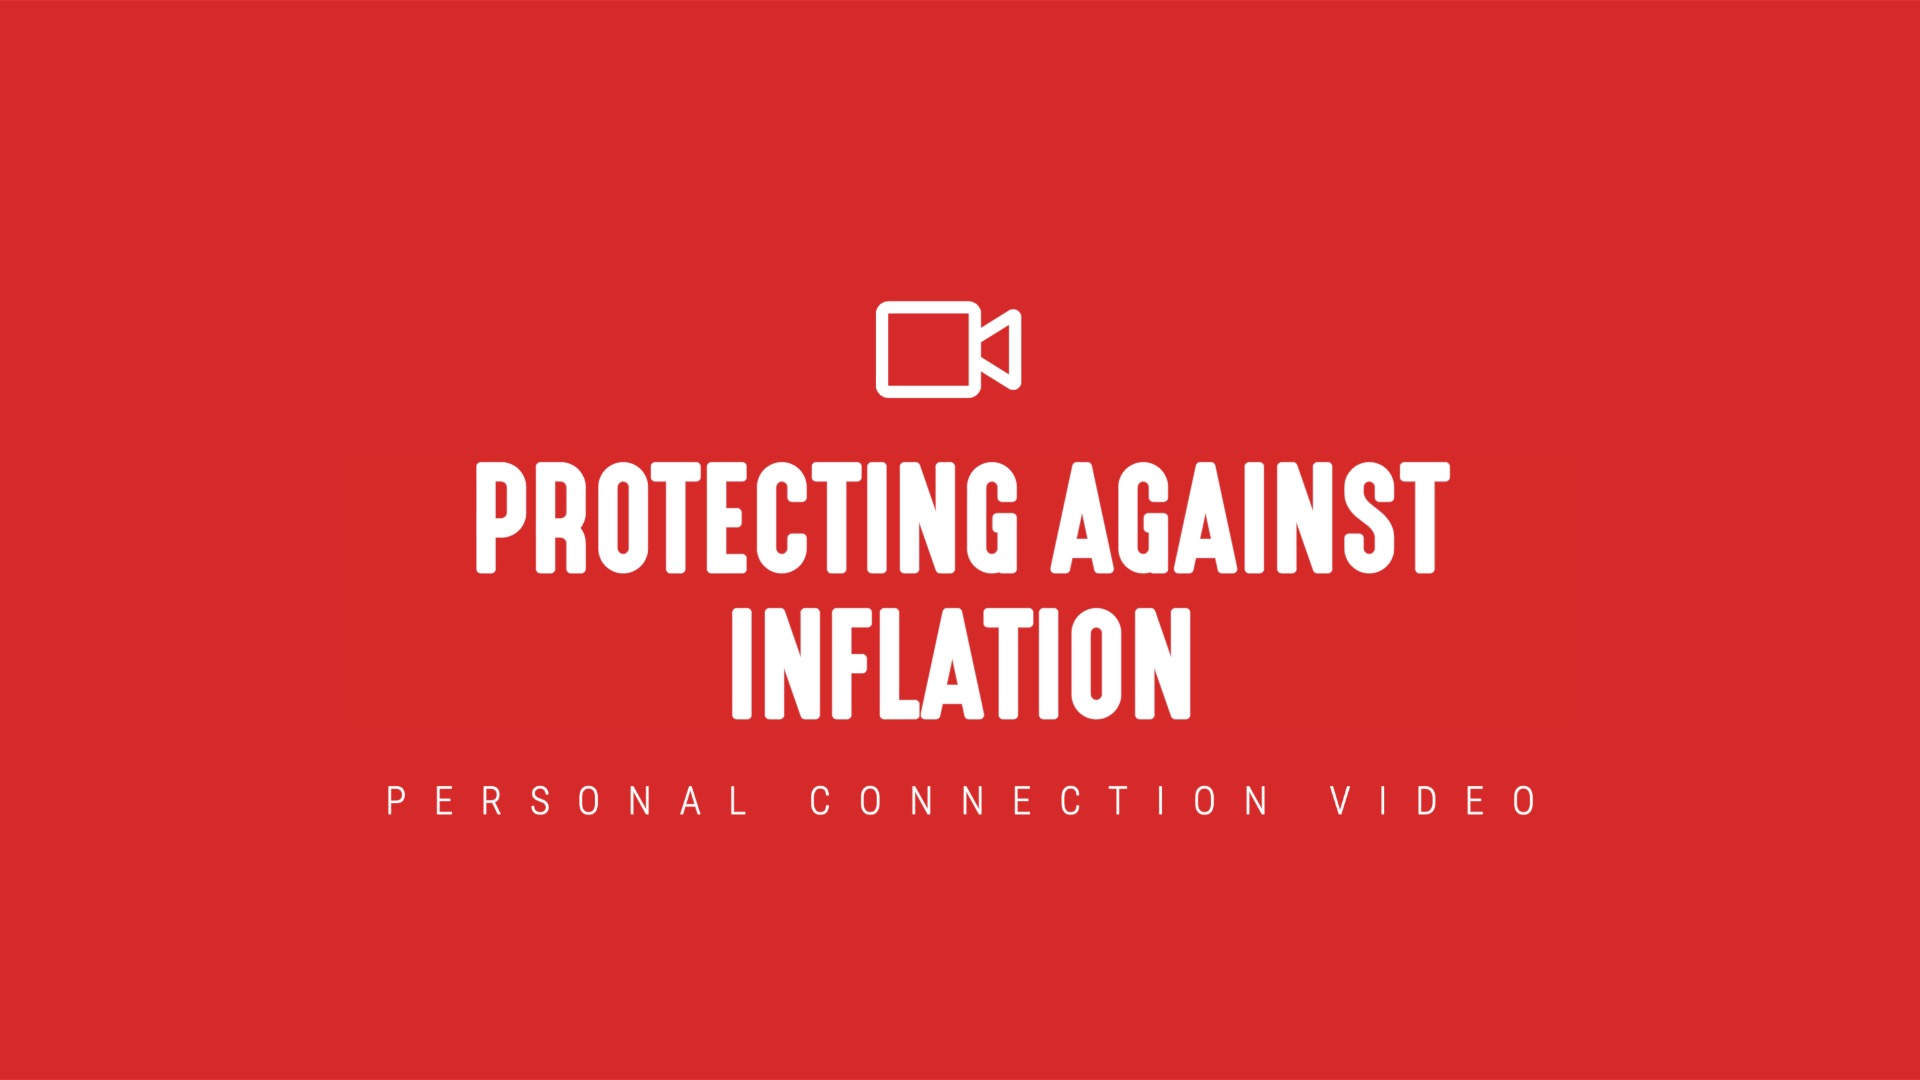 [NEW] Personal Connection Video | Protecting Against Inflation